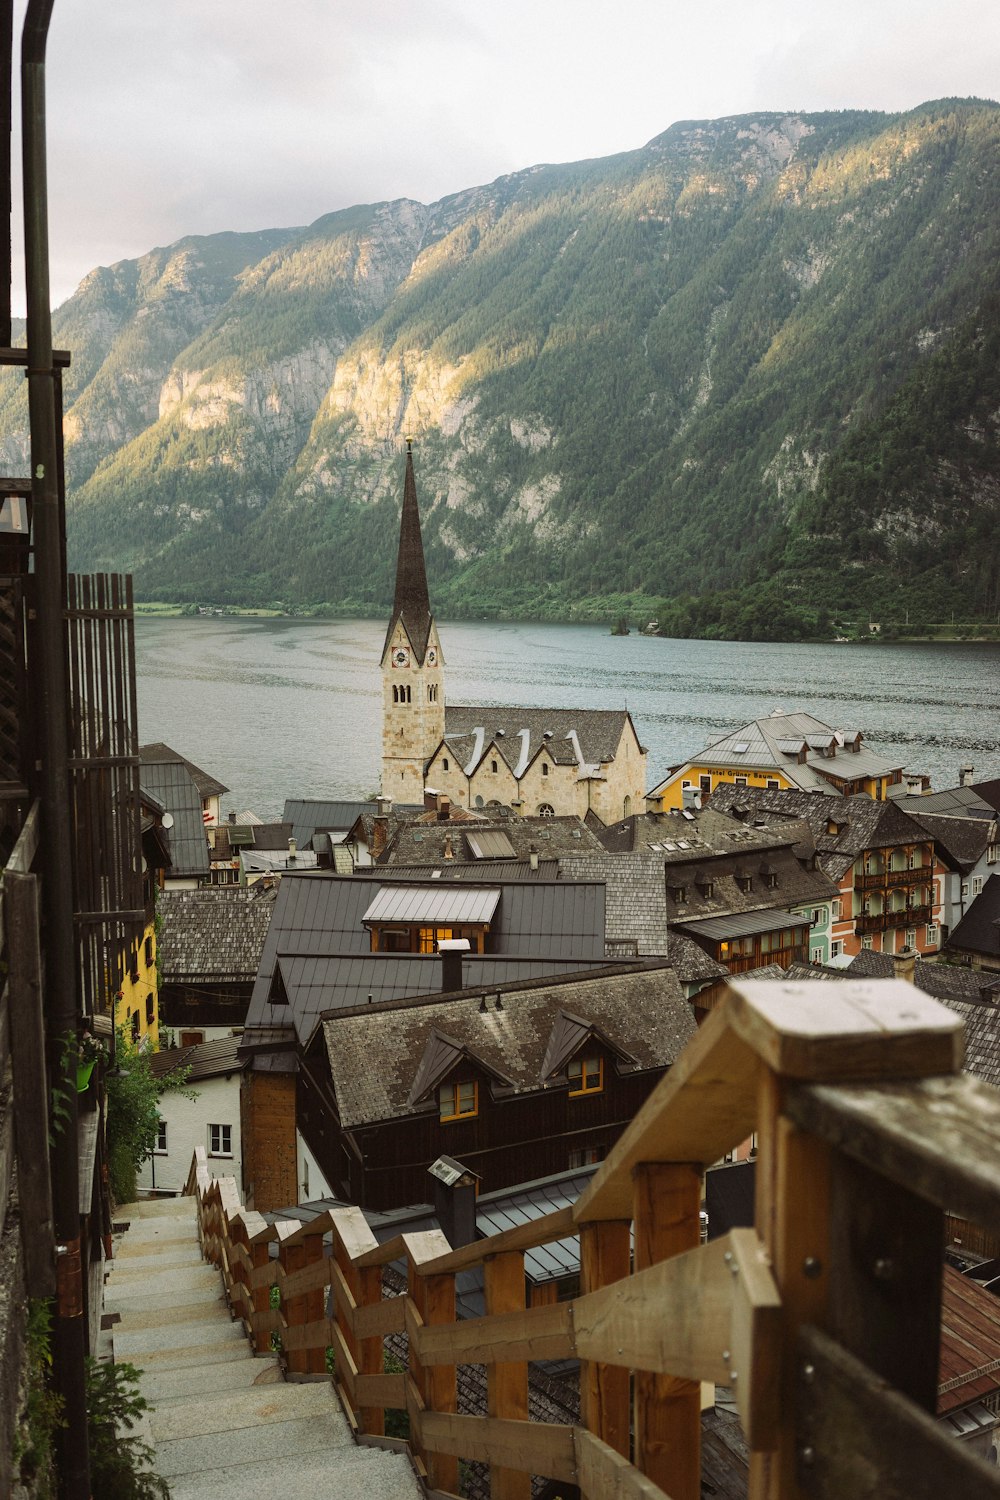 a view of a town with a church and mountains in the background